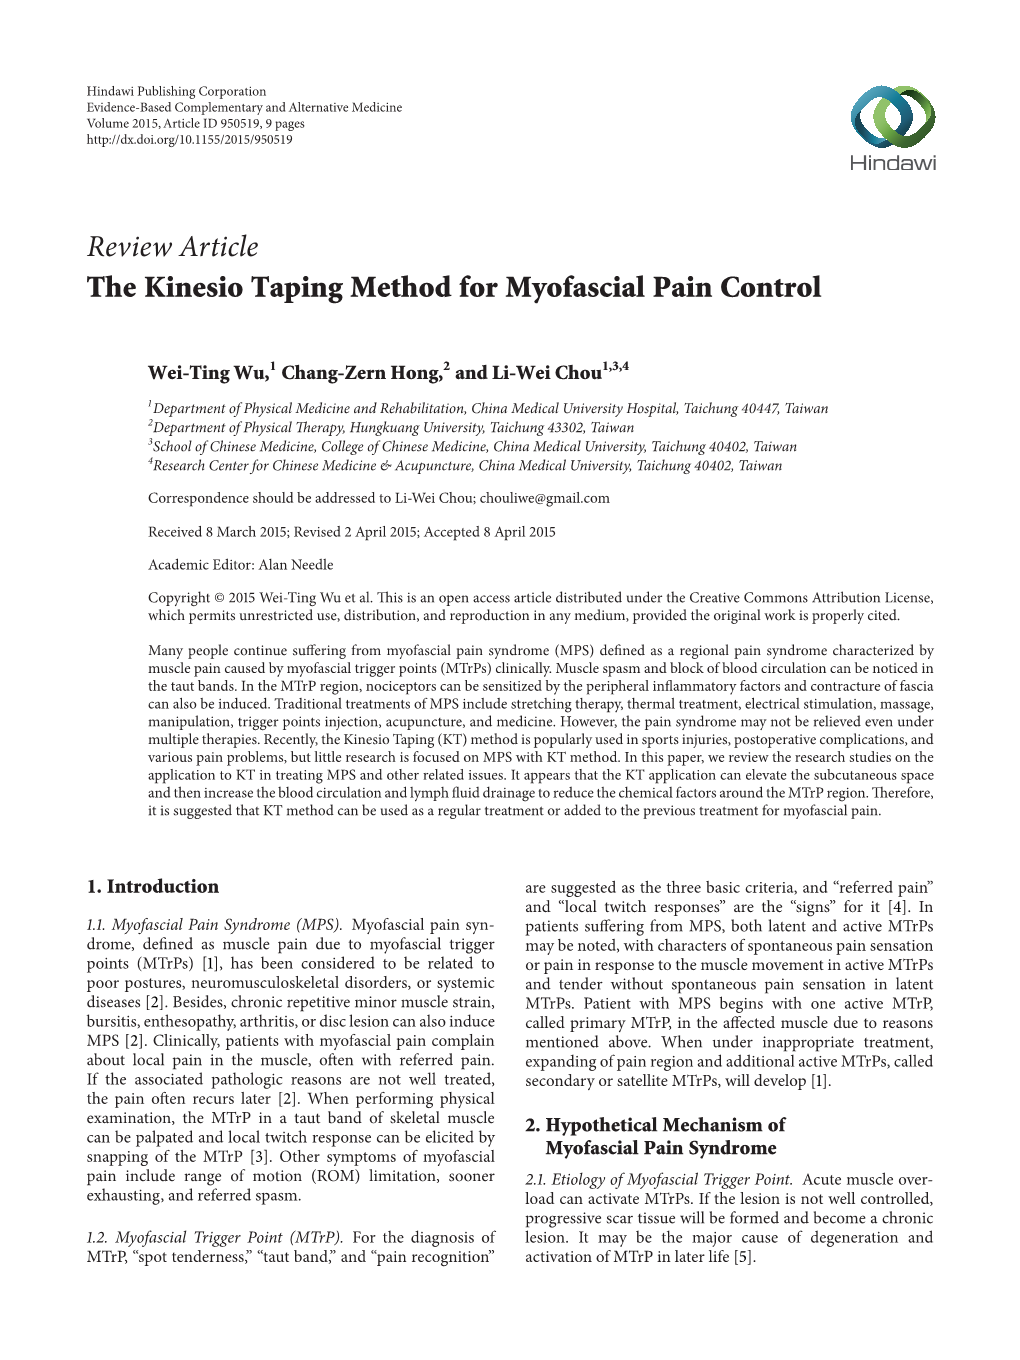 Review Article the Kinesio Taping Method for Myofascial Pain Control